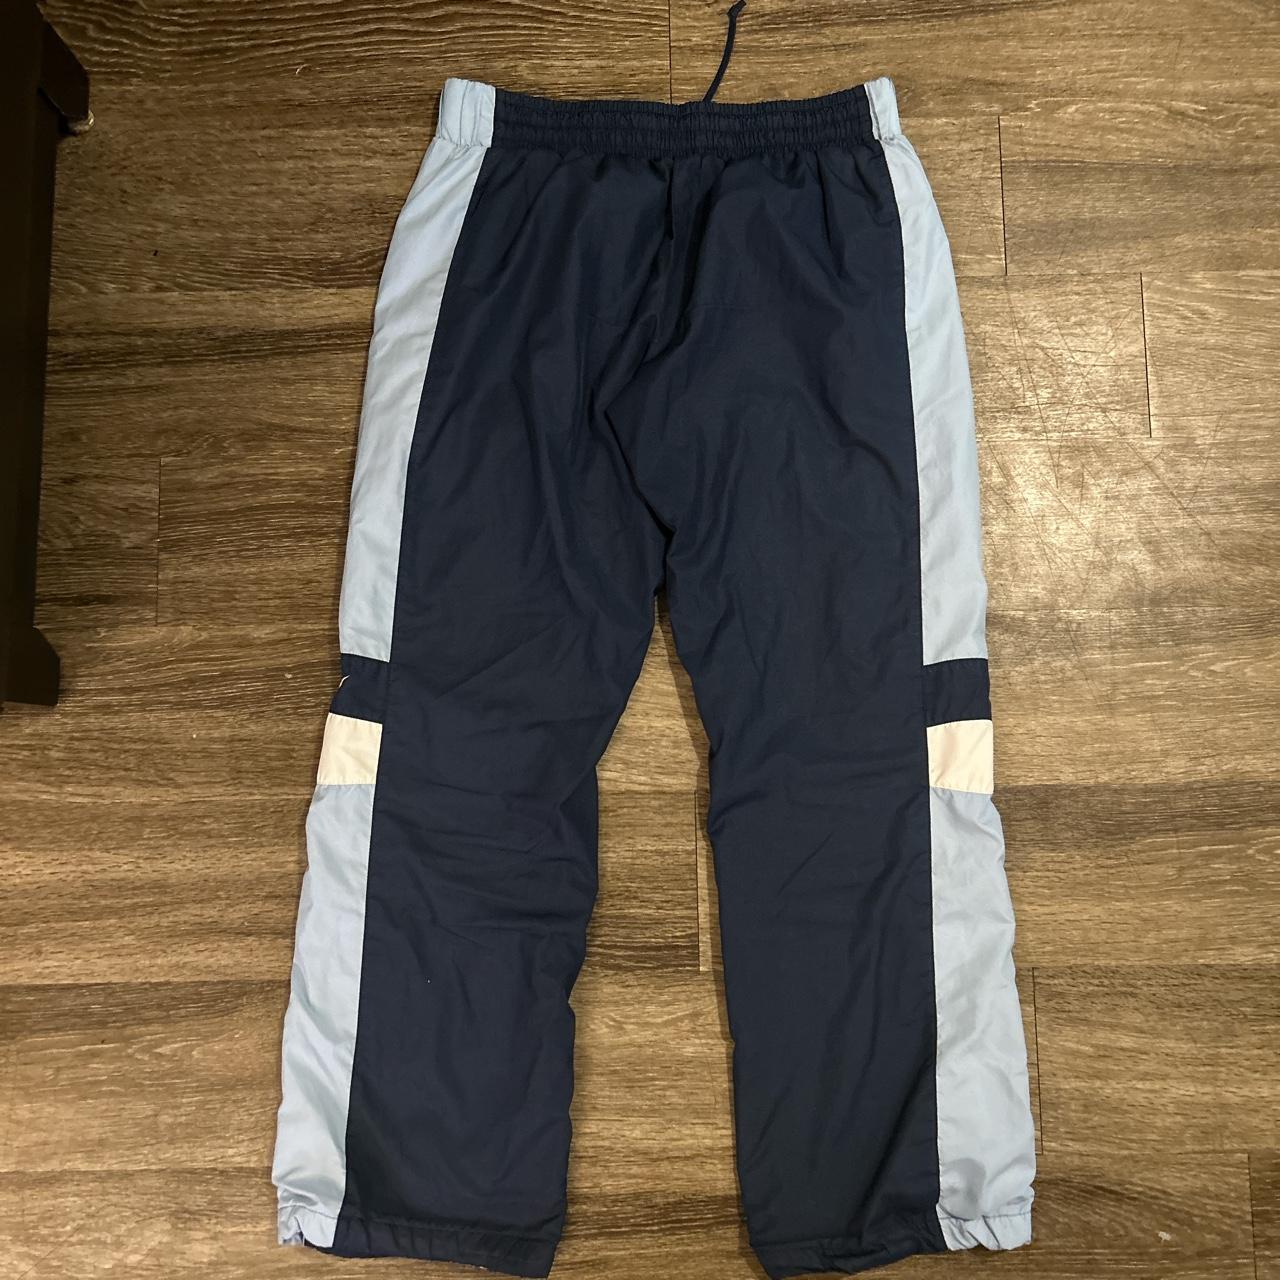 Nike Men's Blue and White Joggers-tracksuits (4)